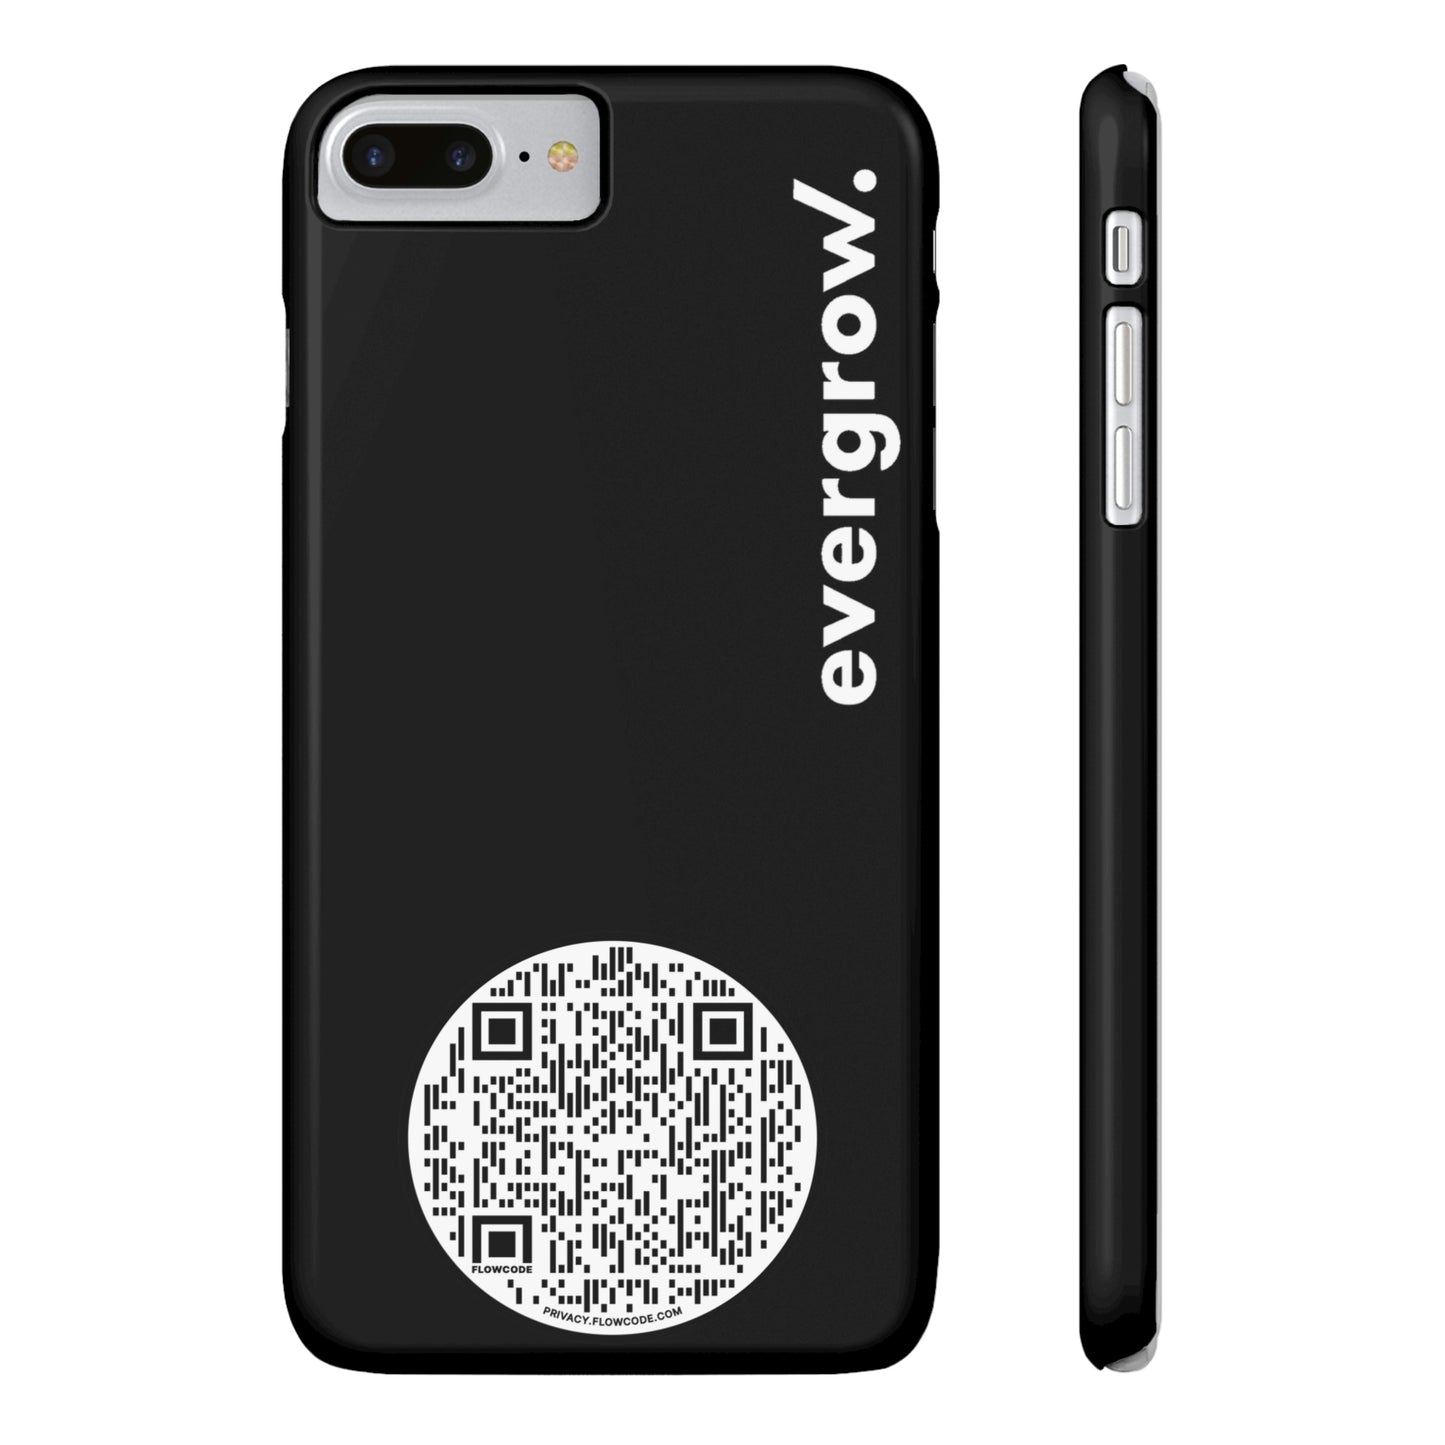 USA - Slim Phone Cases, Case-Mate - with evergrow logo and QR code